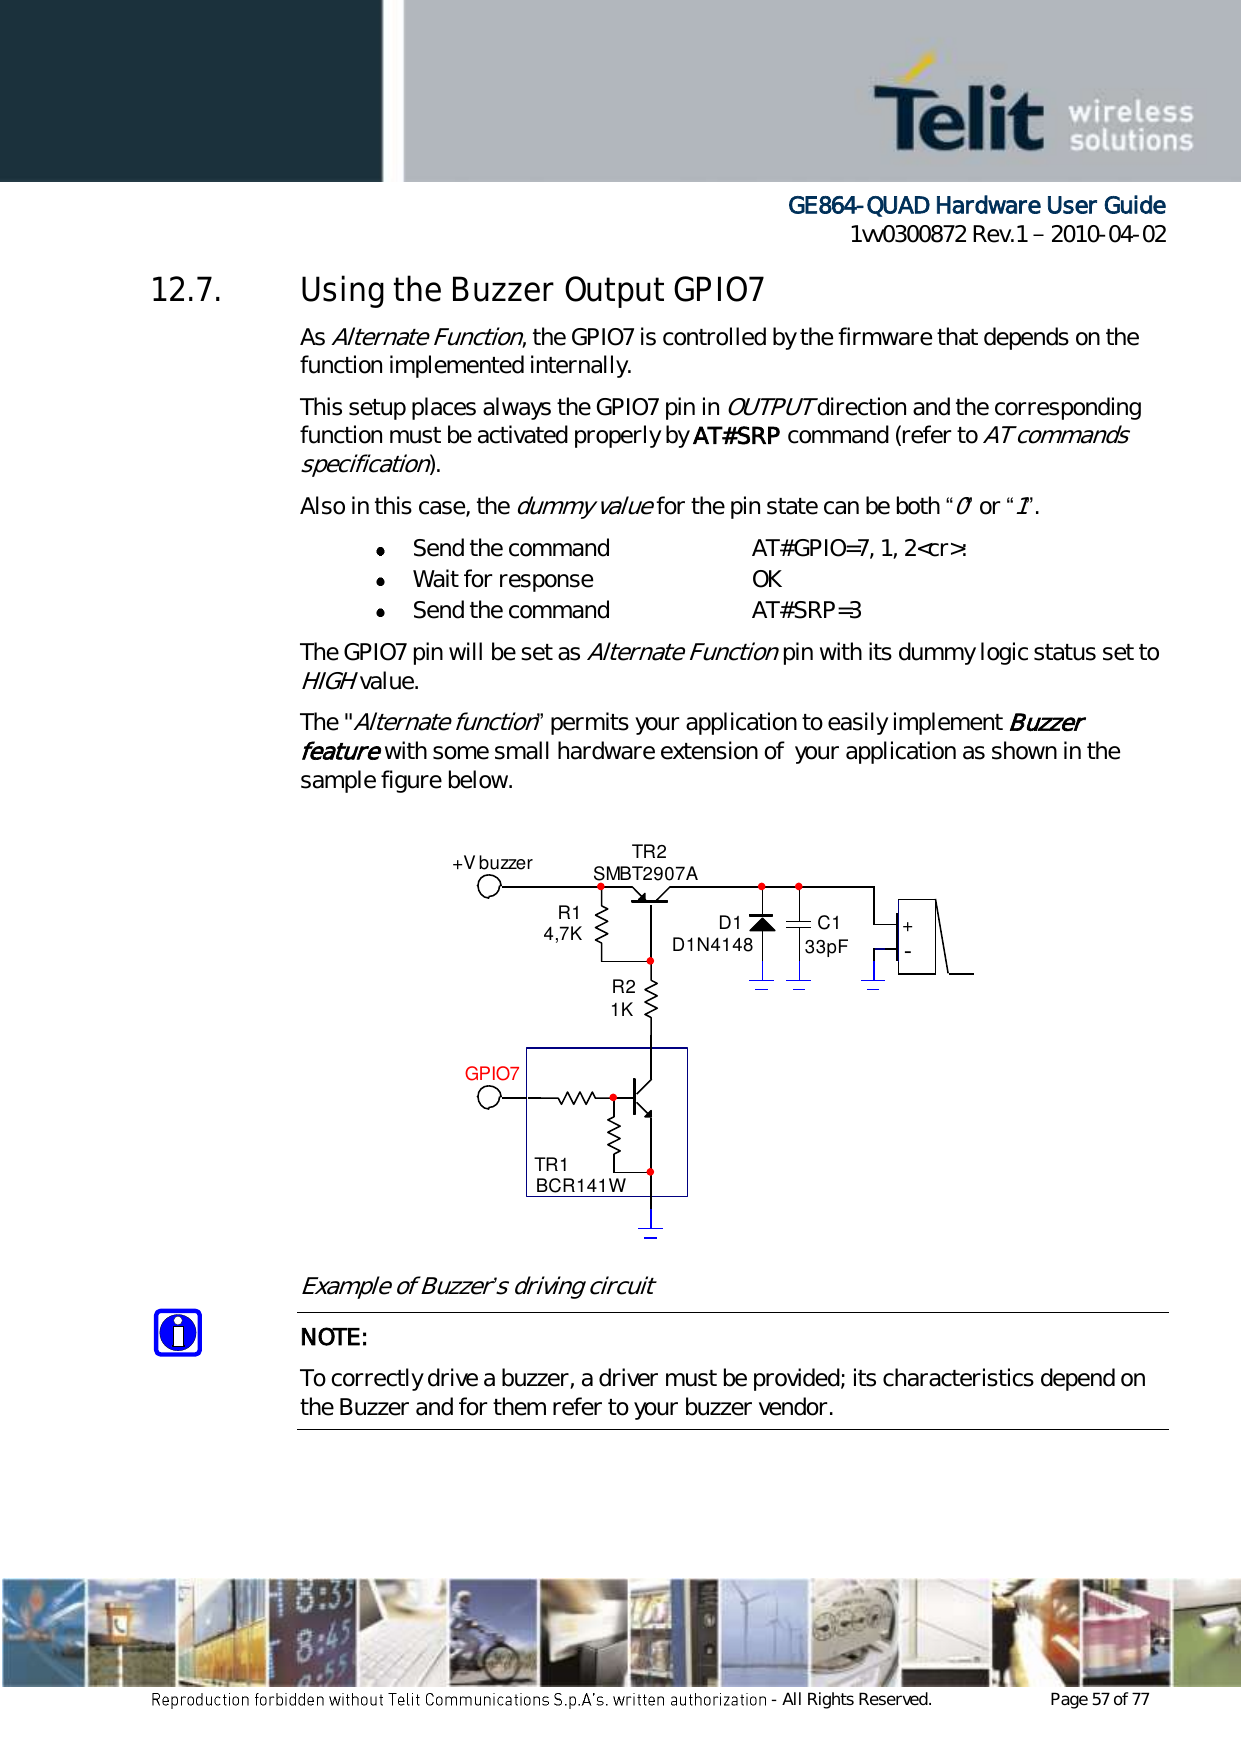      GE864-QUAD Hardware User Guide 1vv0300872 Rev.1   2010-04-02 - All Rights Reserved.    Page 57 of 77  12.7. Using the Buzzer Output GPIO7 As Alternate Function, the GPIO7 is controlled by the firmware that depends on the function implemented internally. This setup places always the GPIO7 pin in OUTPUT direction and the corresponding function must be activated properly by AT#SRP command (refer to AT commands specification). Also in this case, the dummy value for the pin state can be both “0” or “1”.  Send the command  AT#GPIO=7, 1, 2&lt;cr&gt;:  Wait for response  OK  Send the command  AT#SRP=3 The GPIO7 pin will be set as Alternate Function pin with its dummy logic status set to HIGH value. The &quot;Alternate function” permits your application to easily implement Buzzer feature with some small hardware extension of  your application as shown in the sample figure below. Example of Buzzer’s driving circuit NOTE: To correctly drive a buzzer, a driver must be provided; its characteristics depend on the Buzzer and for them refer to your buzzer vendor. TR1BCR141WTR2SMBT2907AR14,7KR21KD1D1N4148 C133pF +-+V buzzerGPIO7